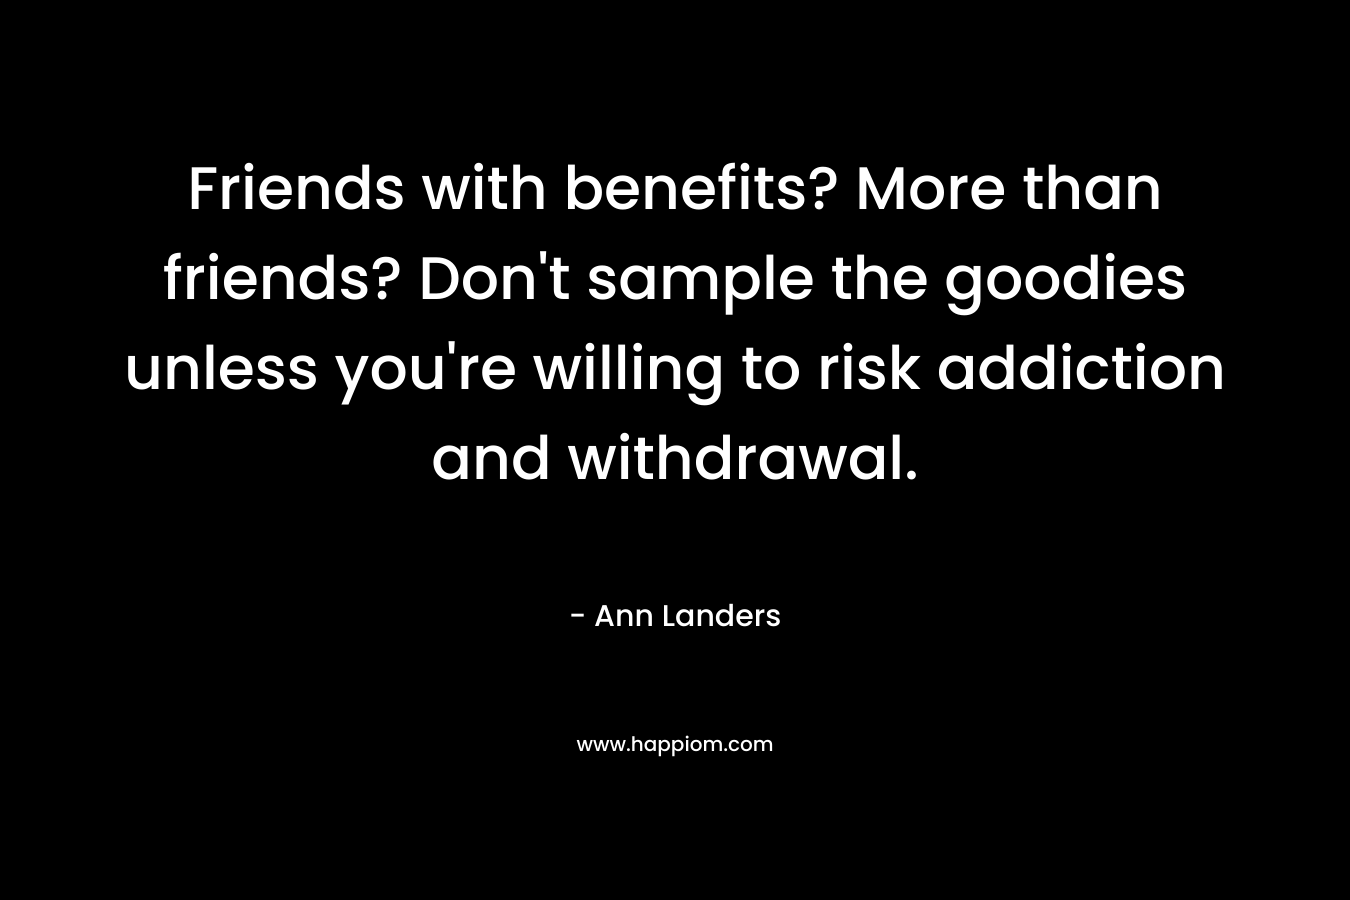 Friends with benefits? More than friends? Don’t sample the goodies unless you’re willing to risk addiction and withdrawal. – Ann Landers